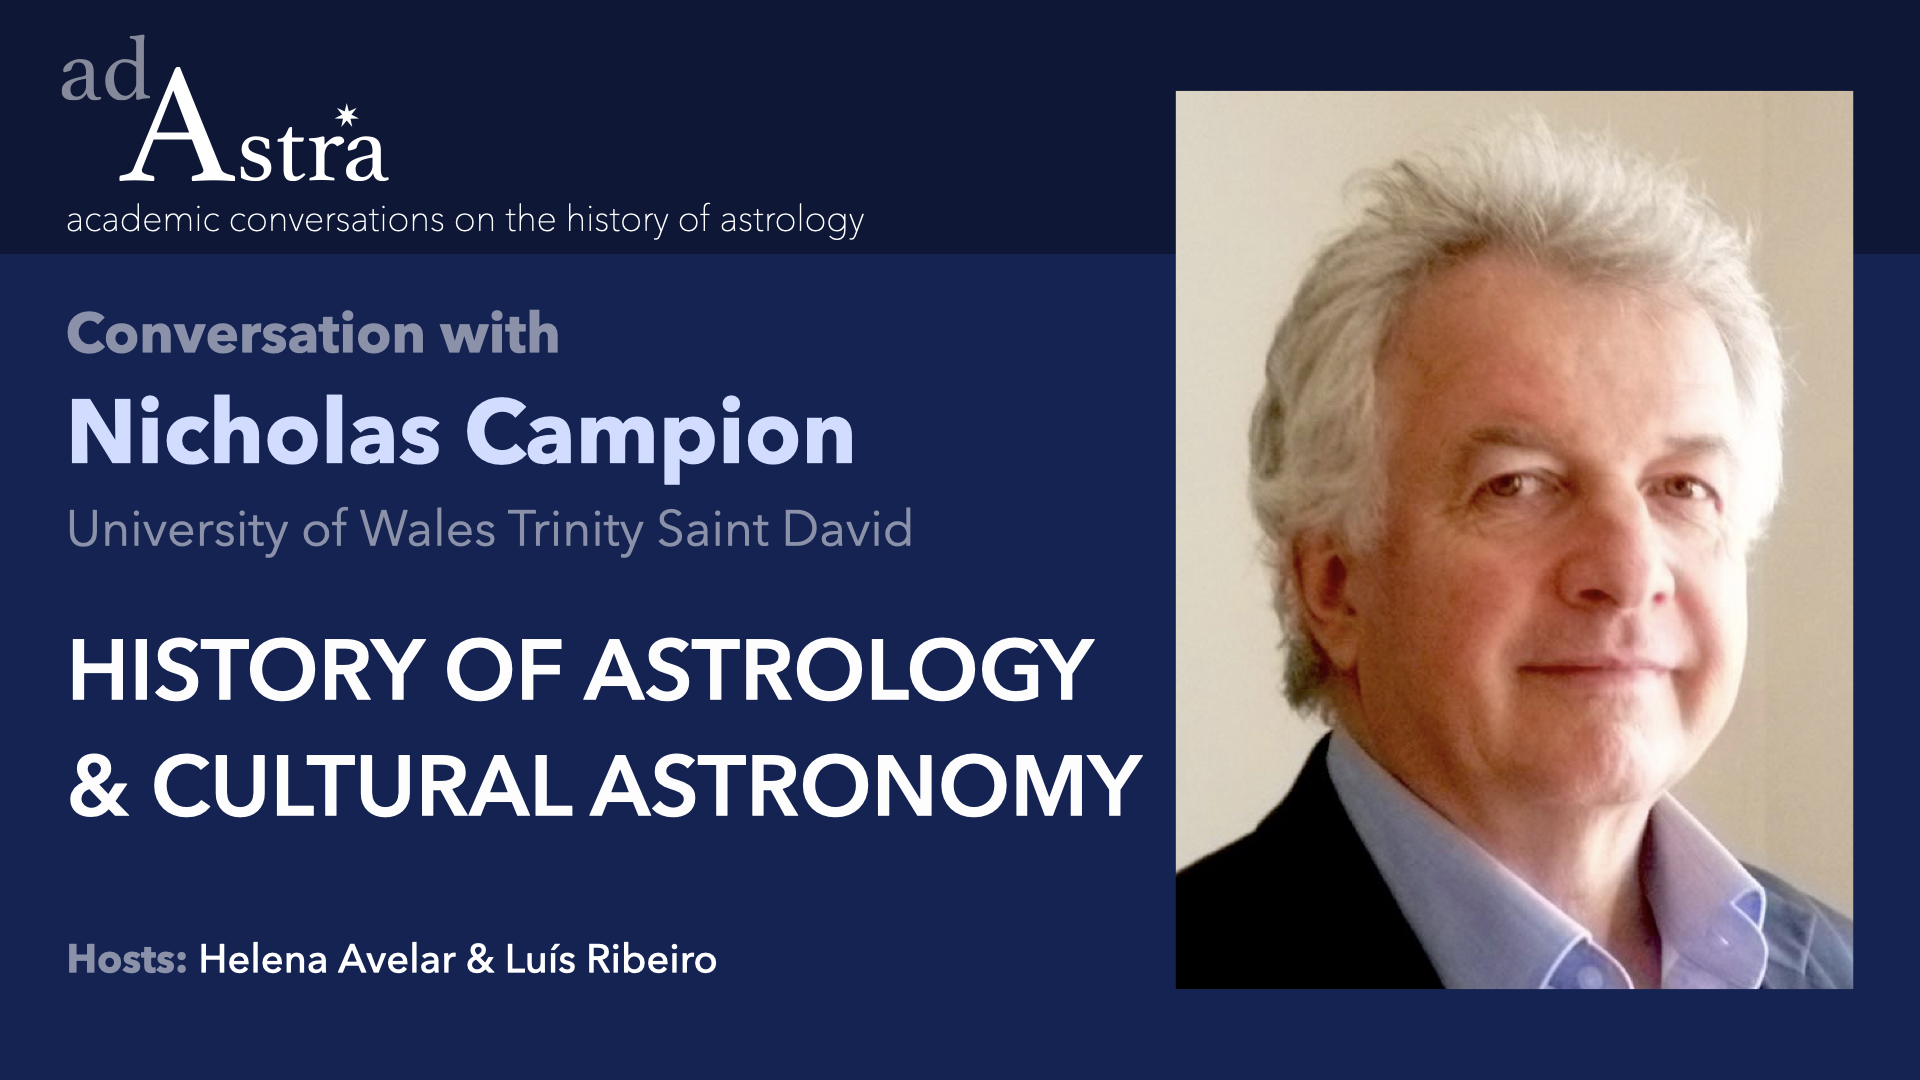 History of Astrology and Cultural Astronomy with Nicholas Campion